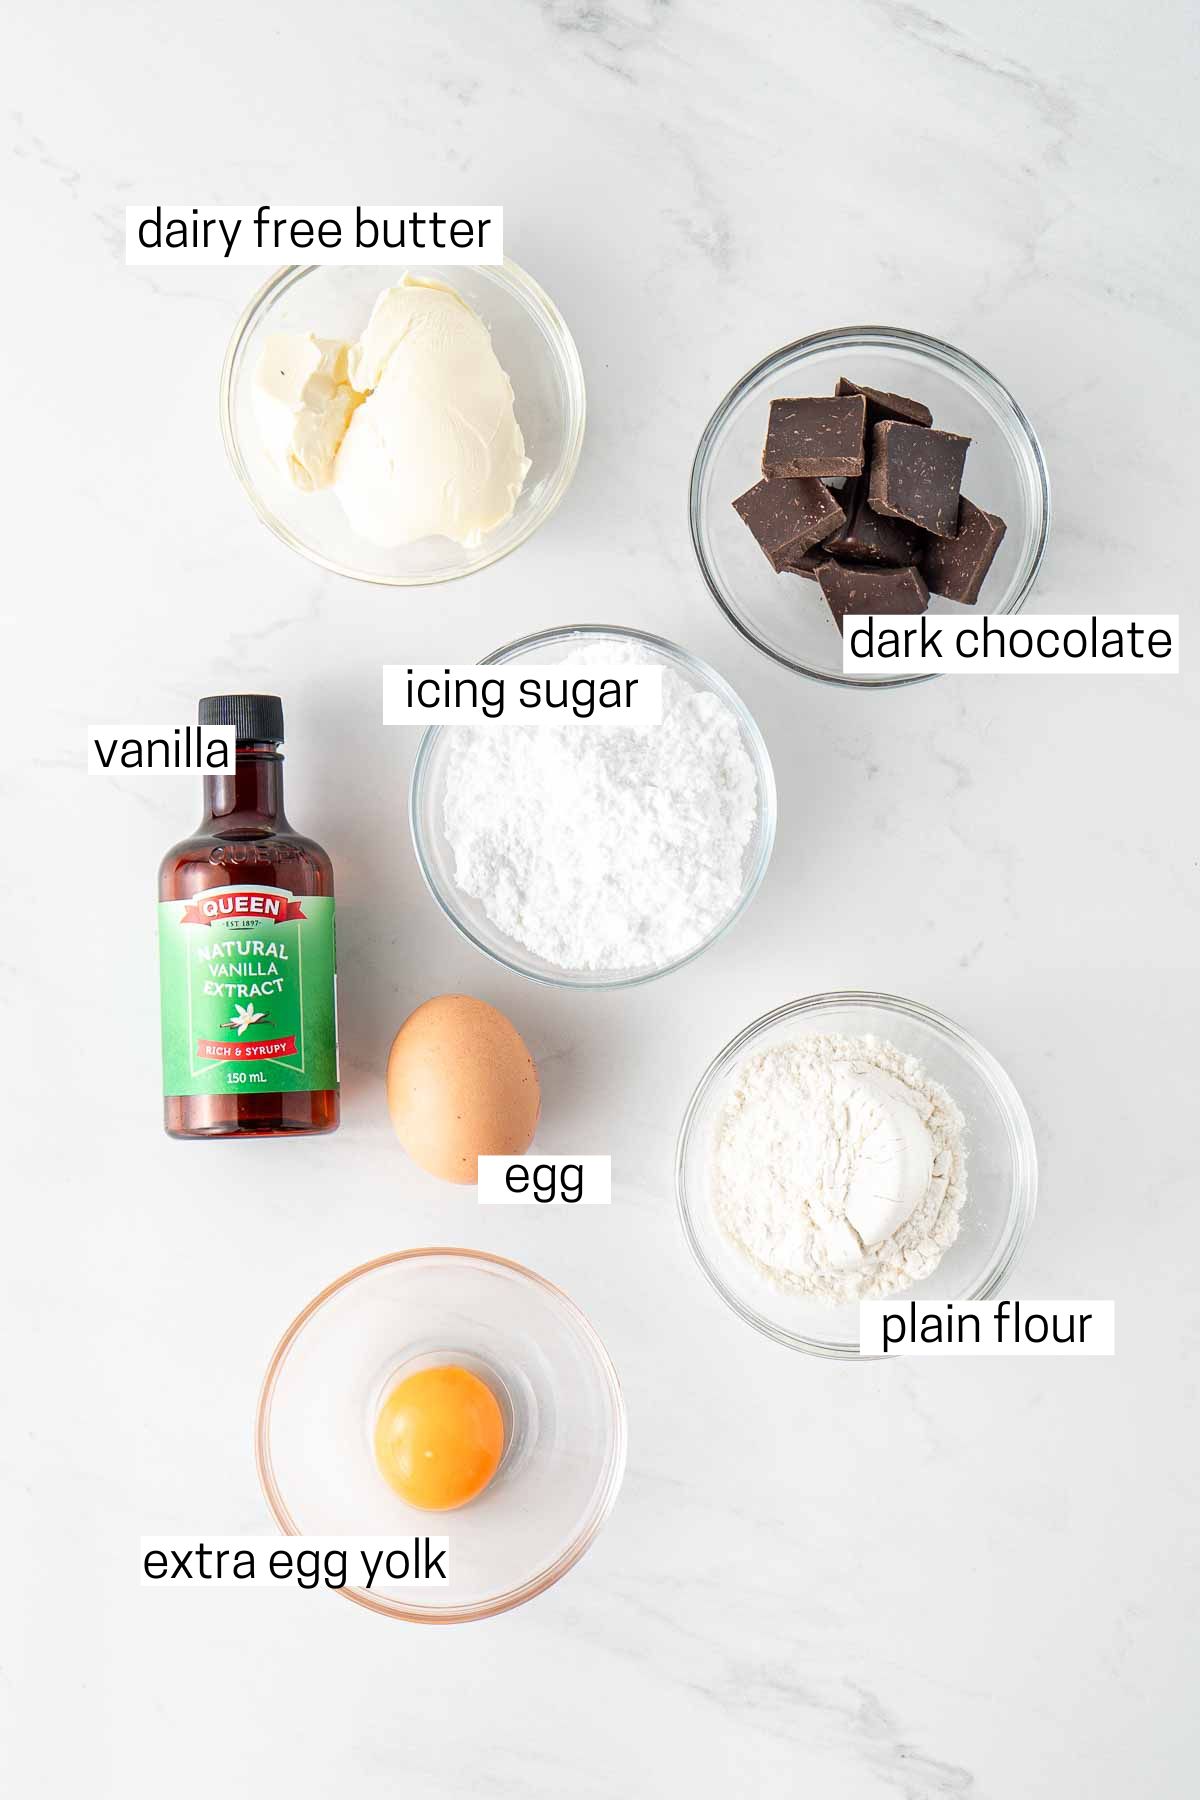 All ingredients needed for chocolate lava cakes laid out in small bowls.